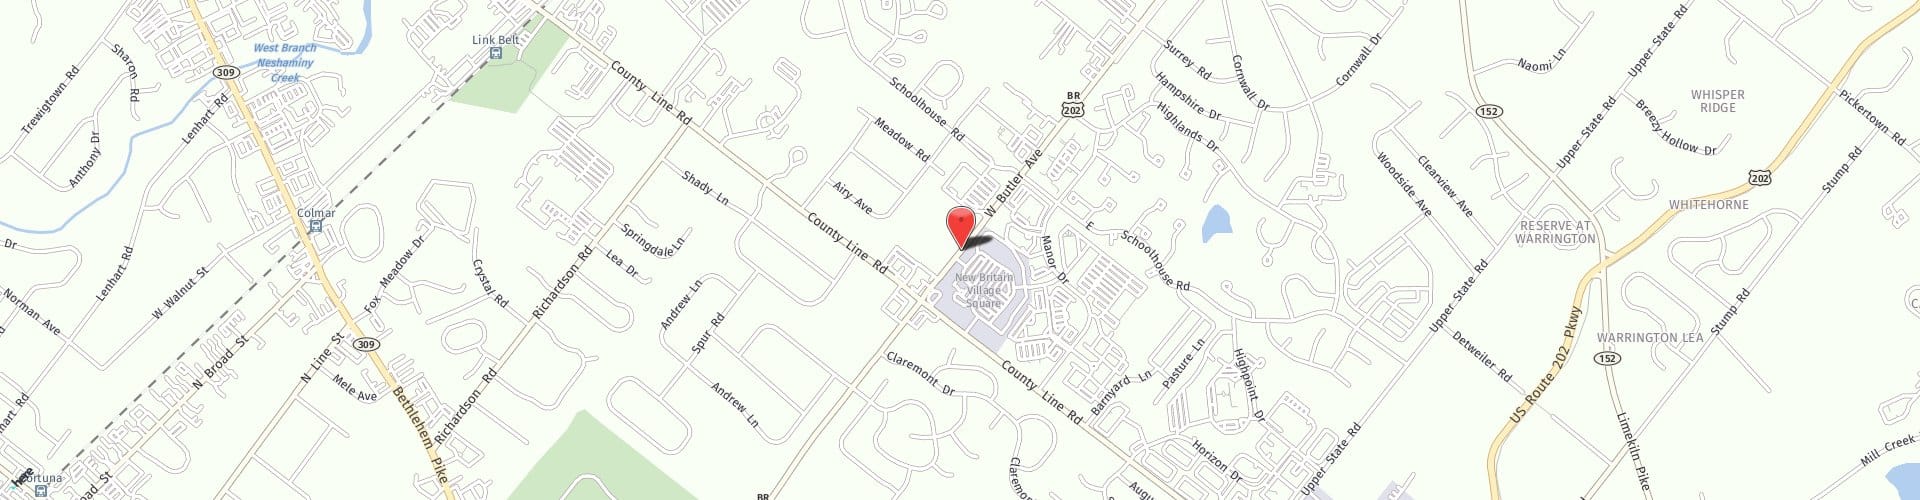 Location Map: 521 W. Butler Ave. Chalfont, PA 18914